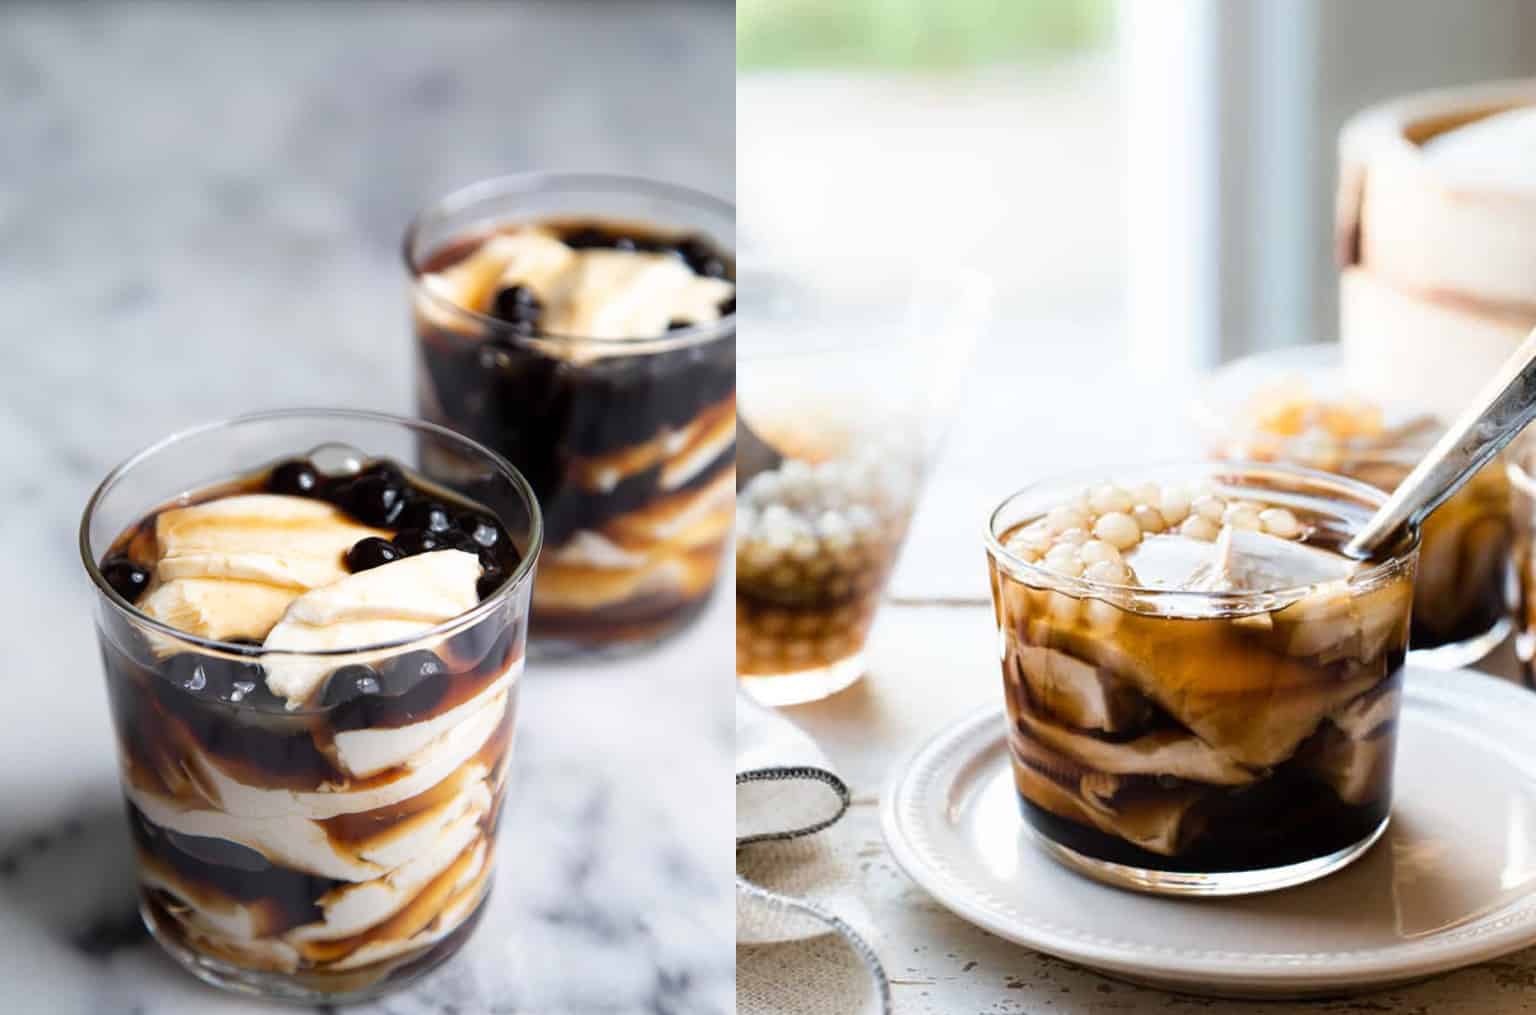 THESE ARE THE 7 HEALTH BENEFITS OF EATING TAHO